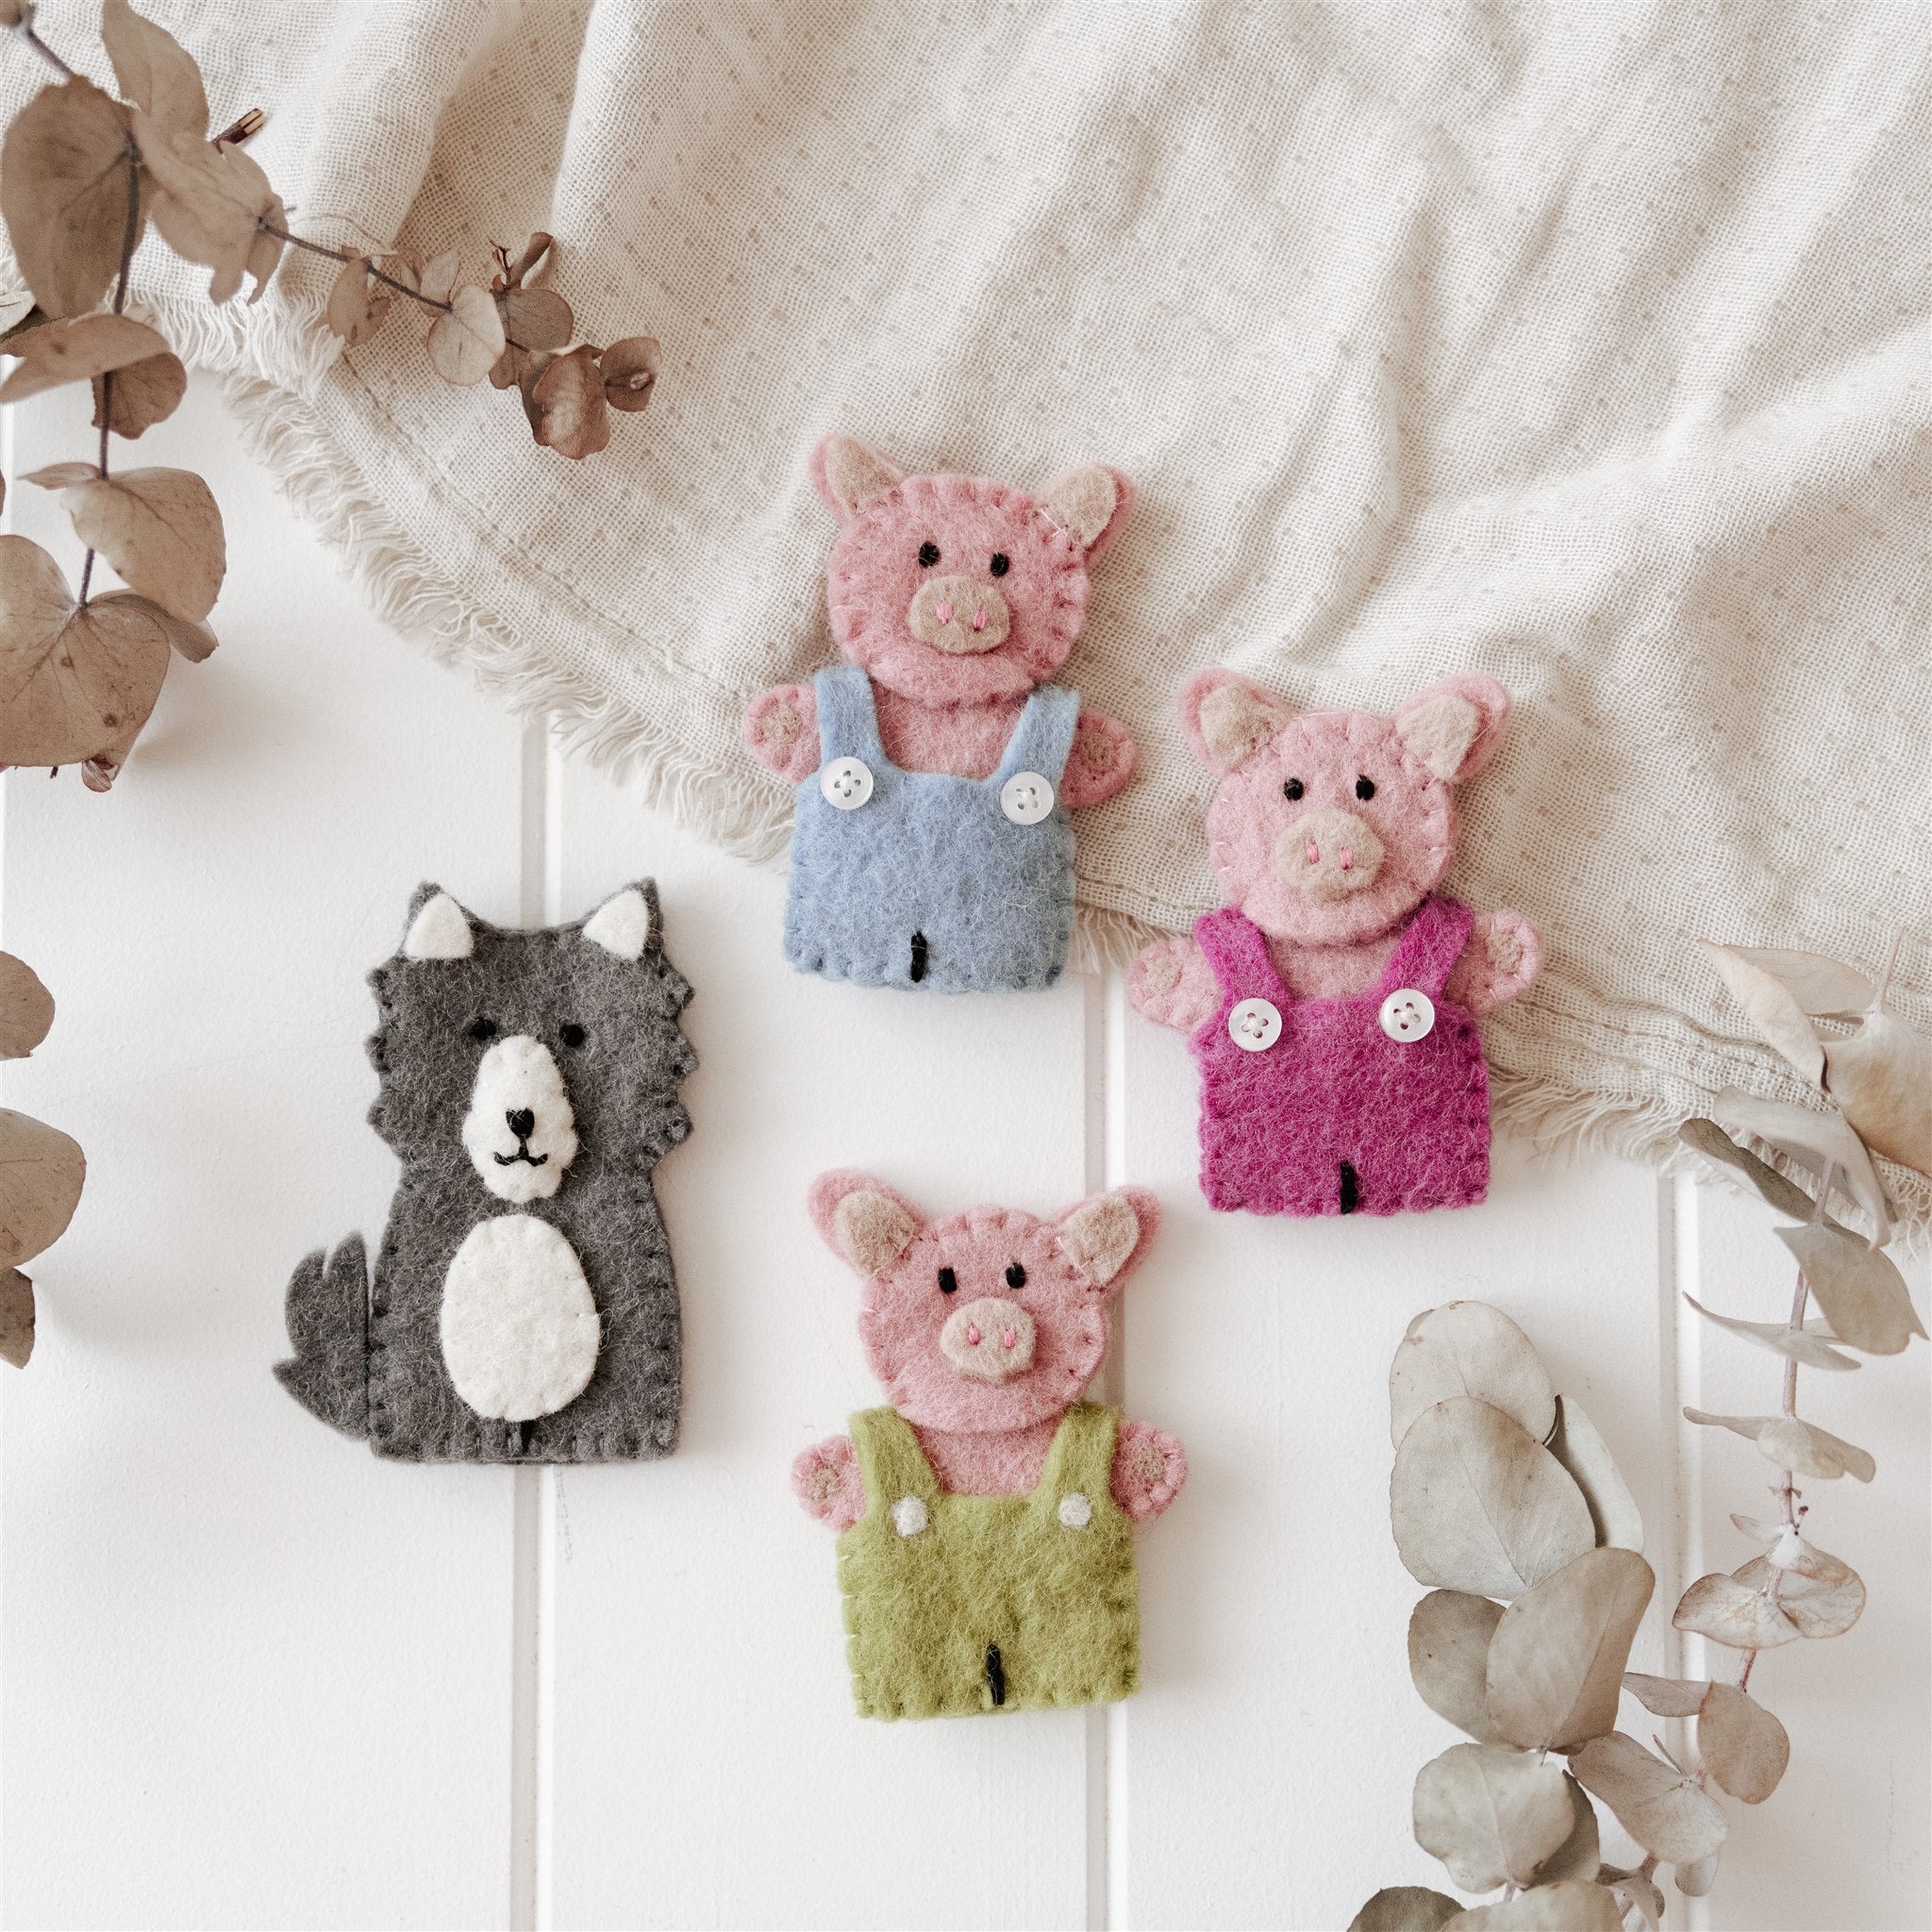 3 Little Pigs and Wolf Puppet Set